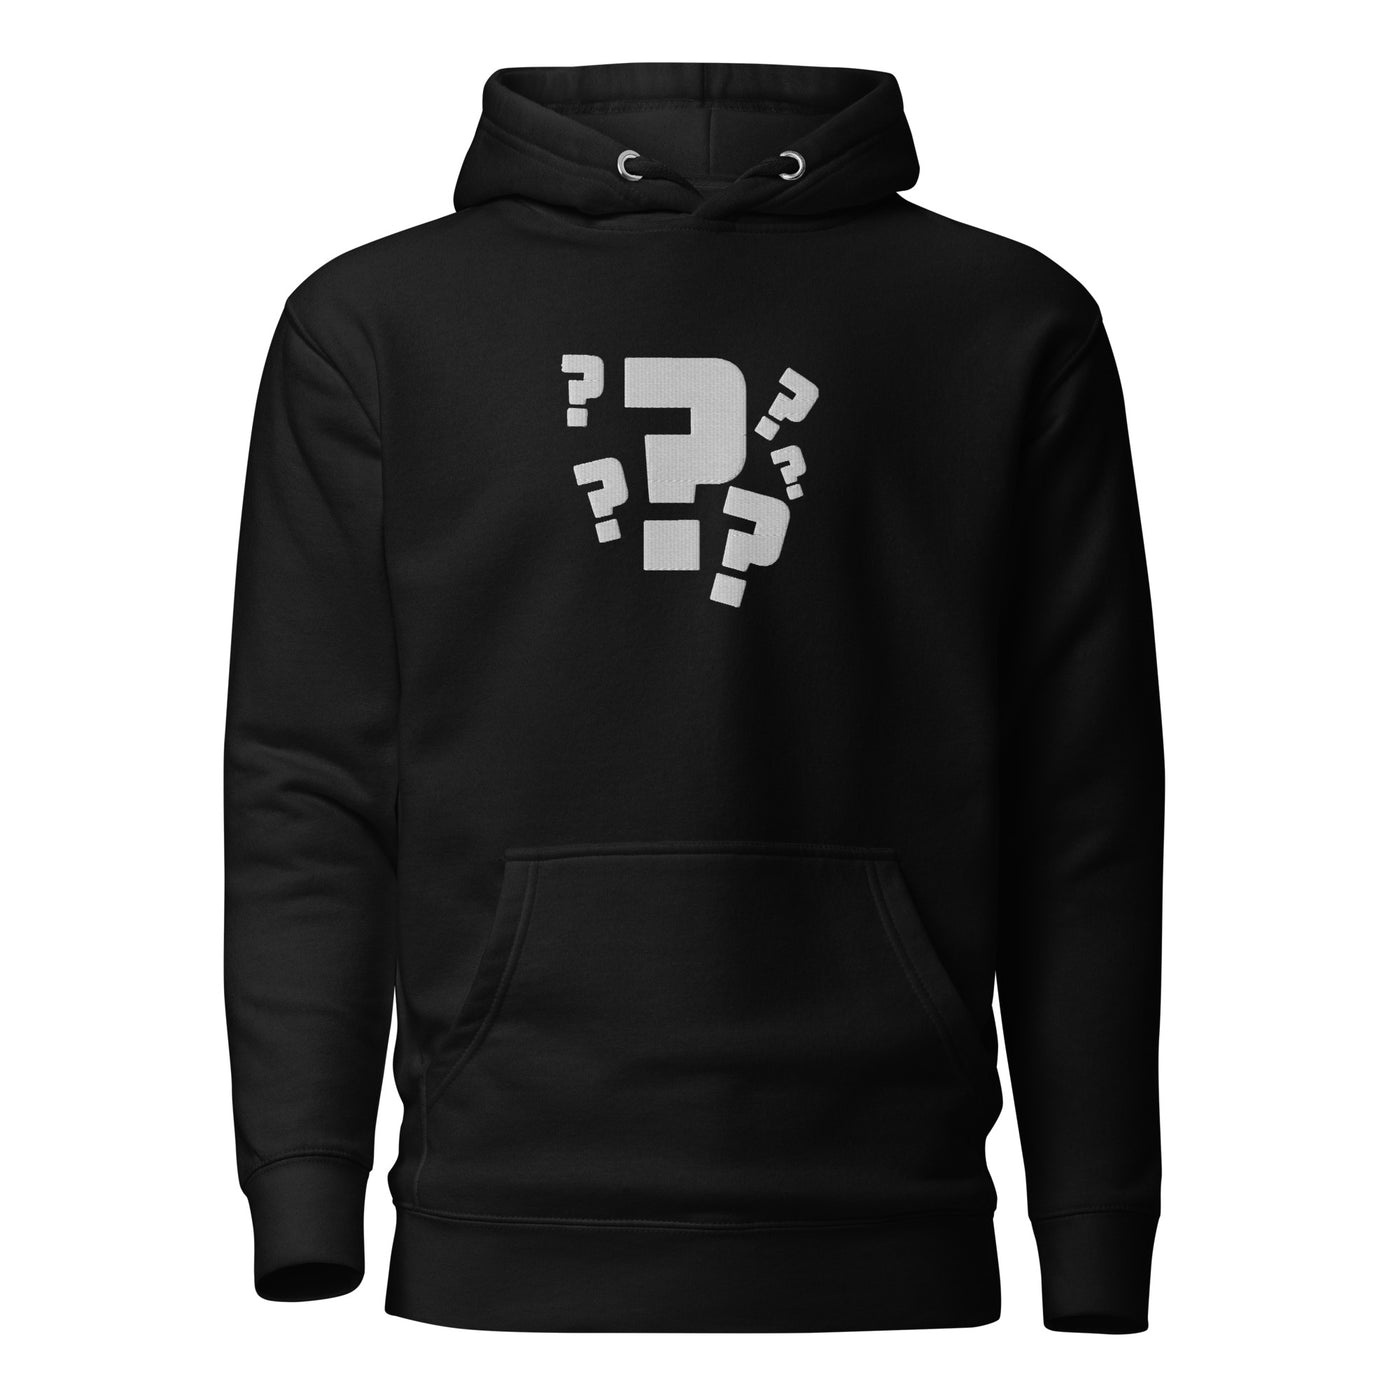 Hoodie of the Month Subscription!